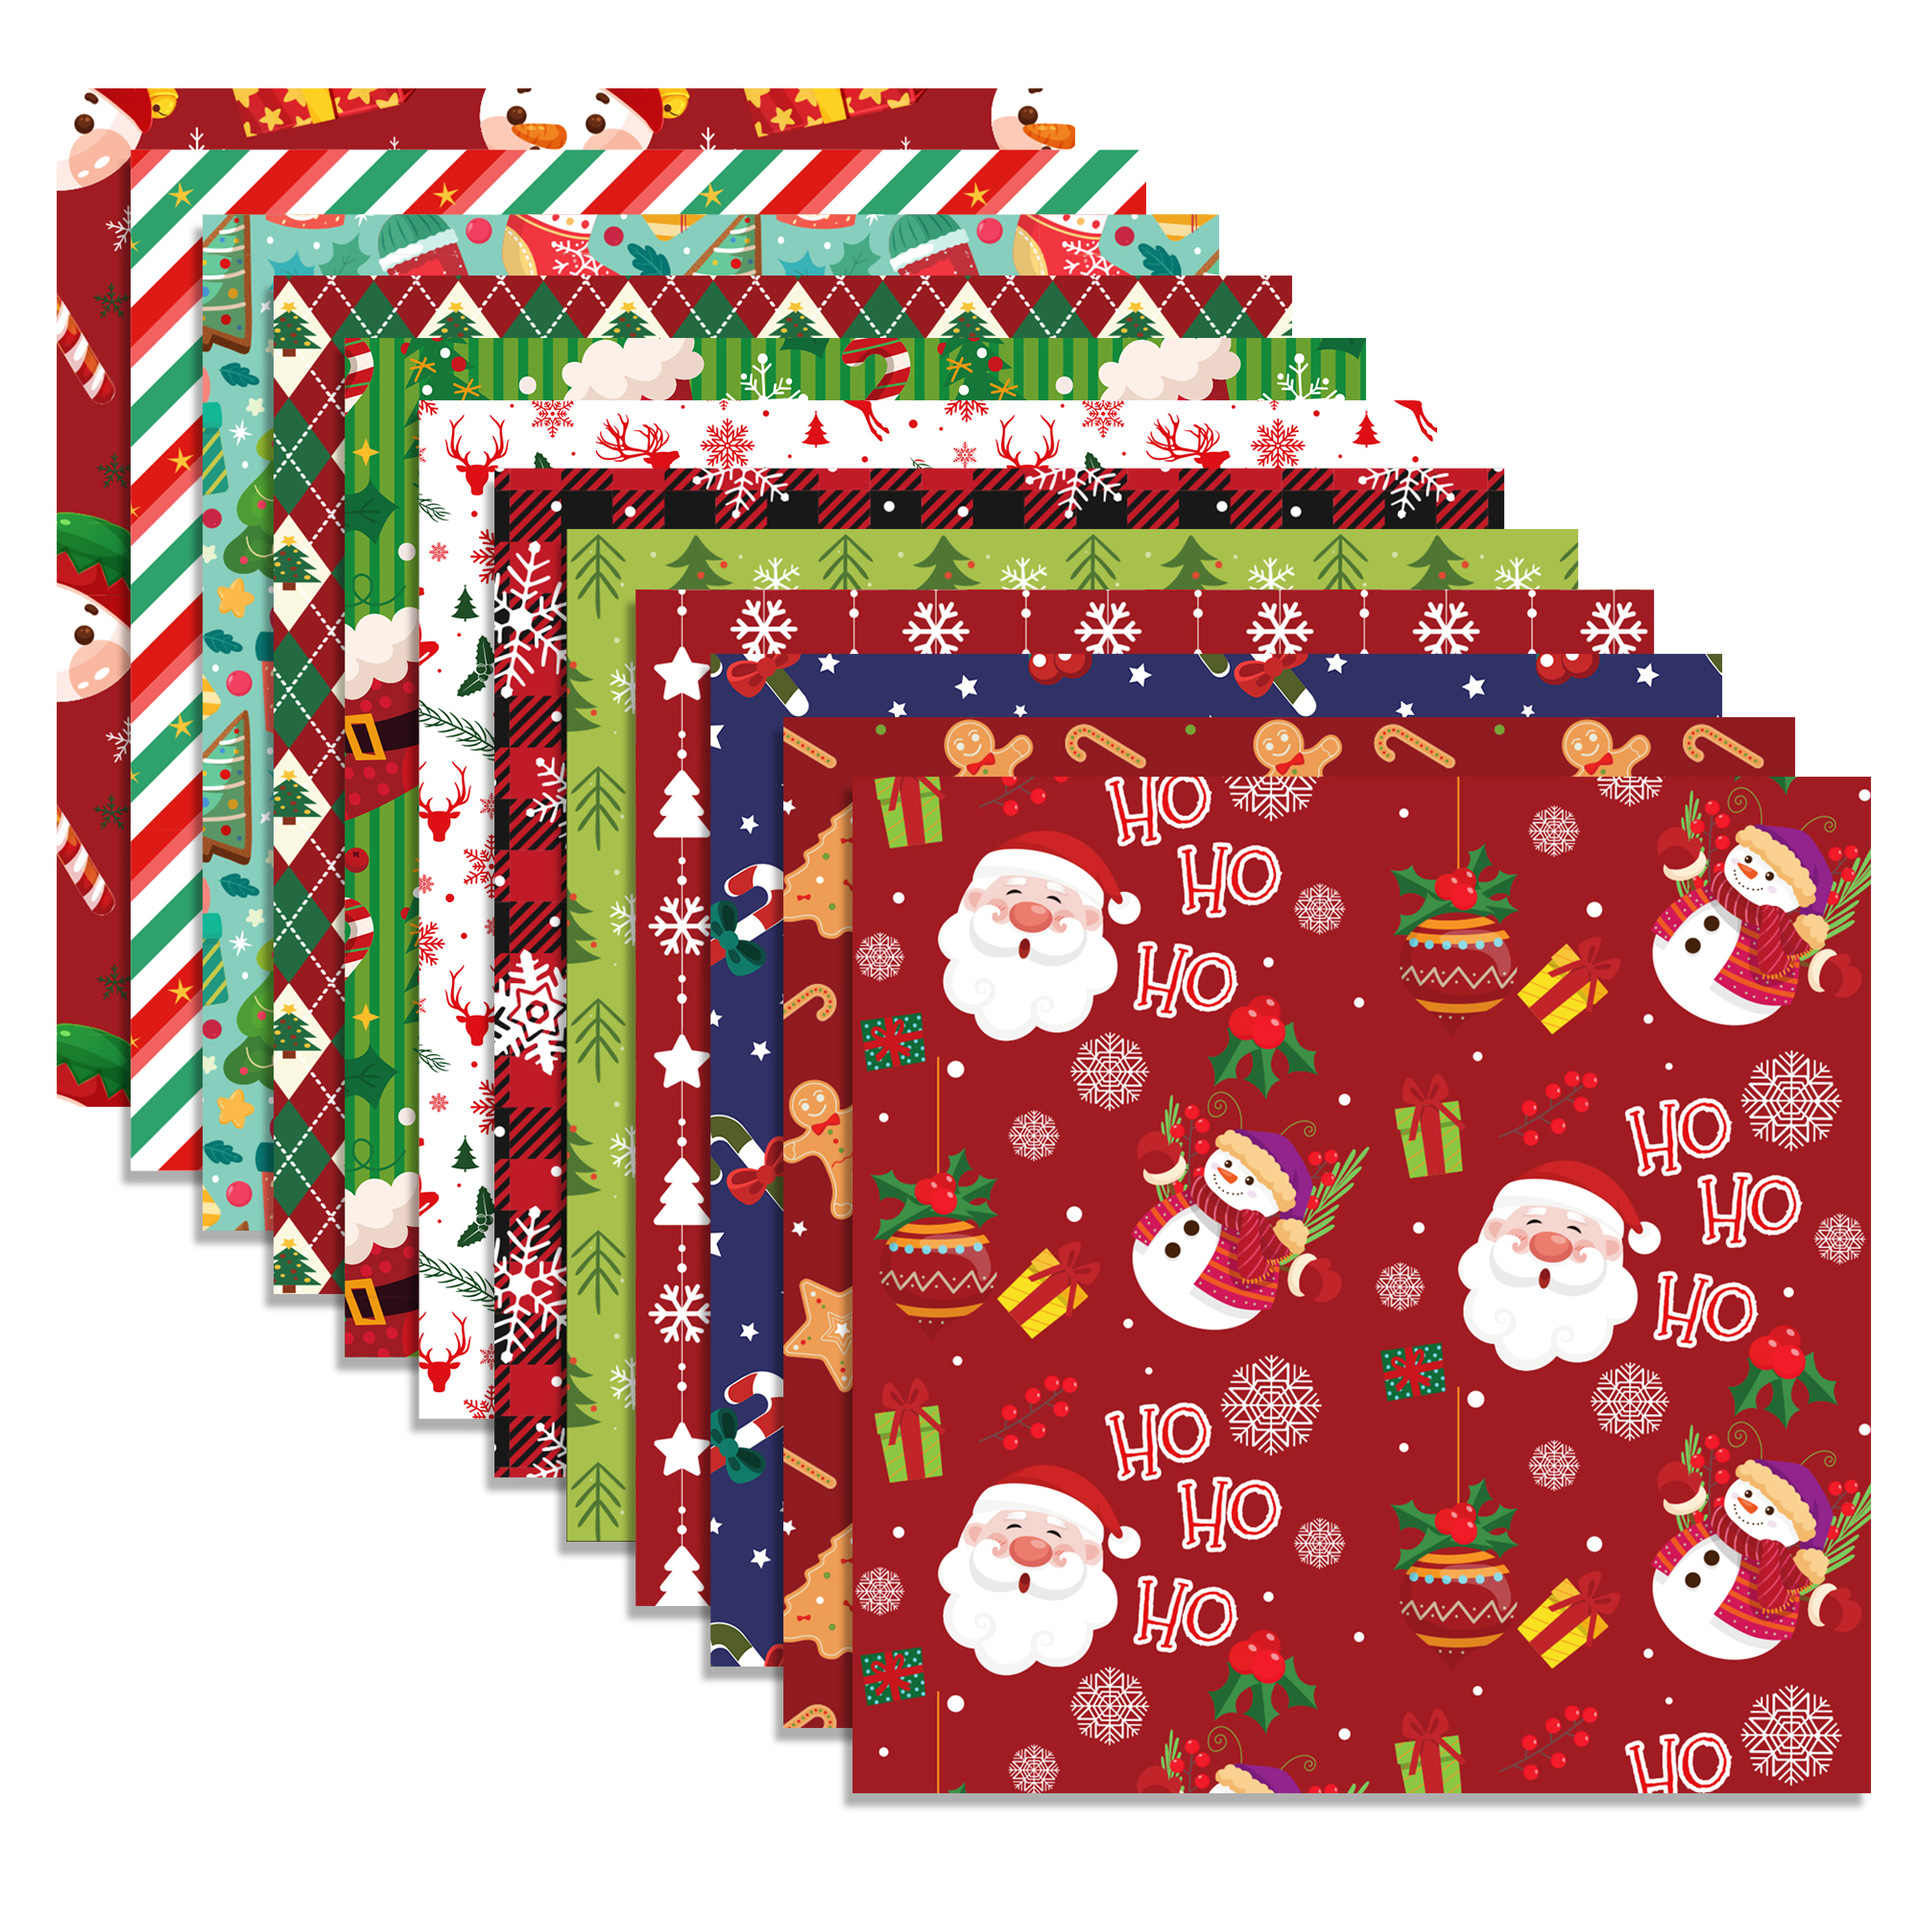 24pcs DIY Handmade Vintage Christmas Sorting Paper Materials, Paper  Patterns, Paper Gift Wrapping Paper, Santa Snowflake Background Paper,  Christmas P